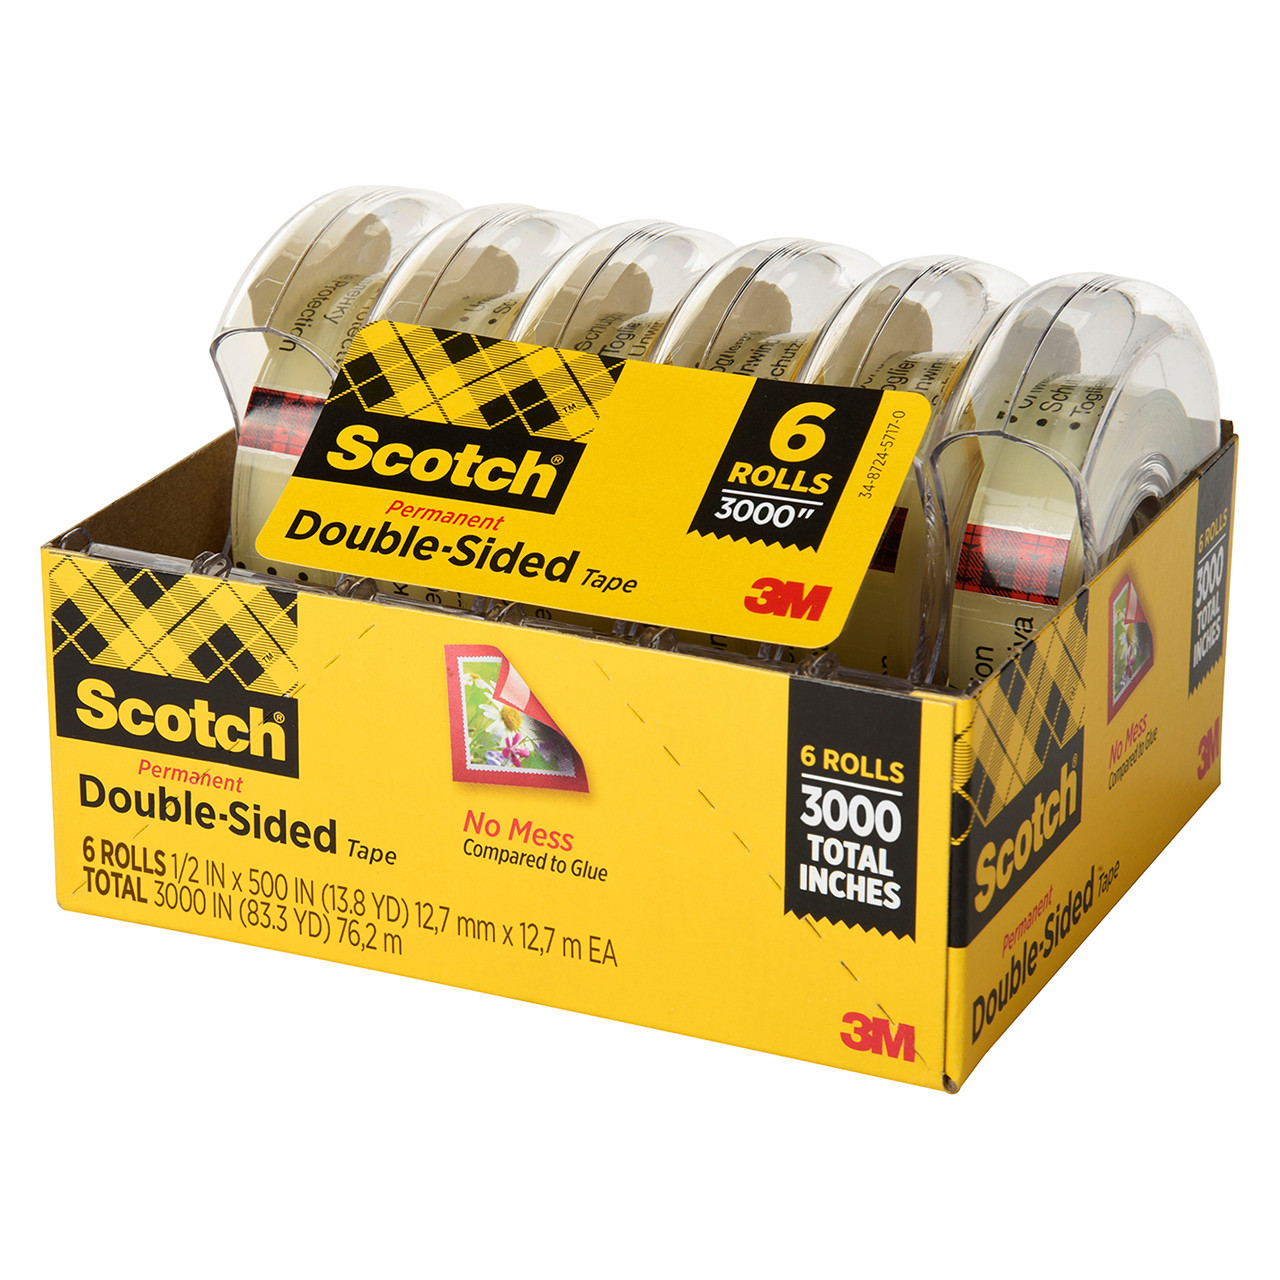 Scotch Double Sided Photo-Safe Permanent Self-Adhesive Office Tape